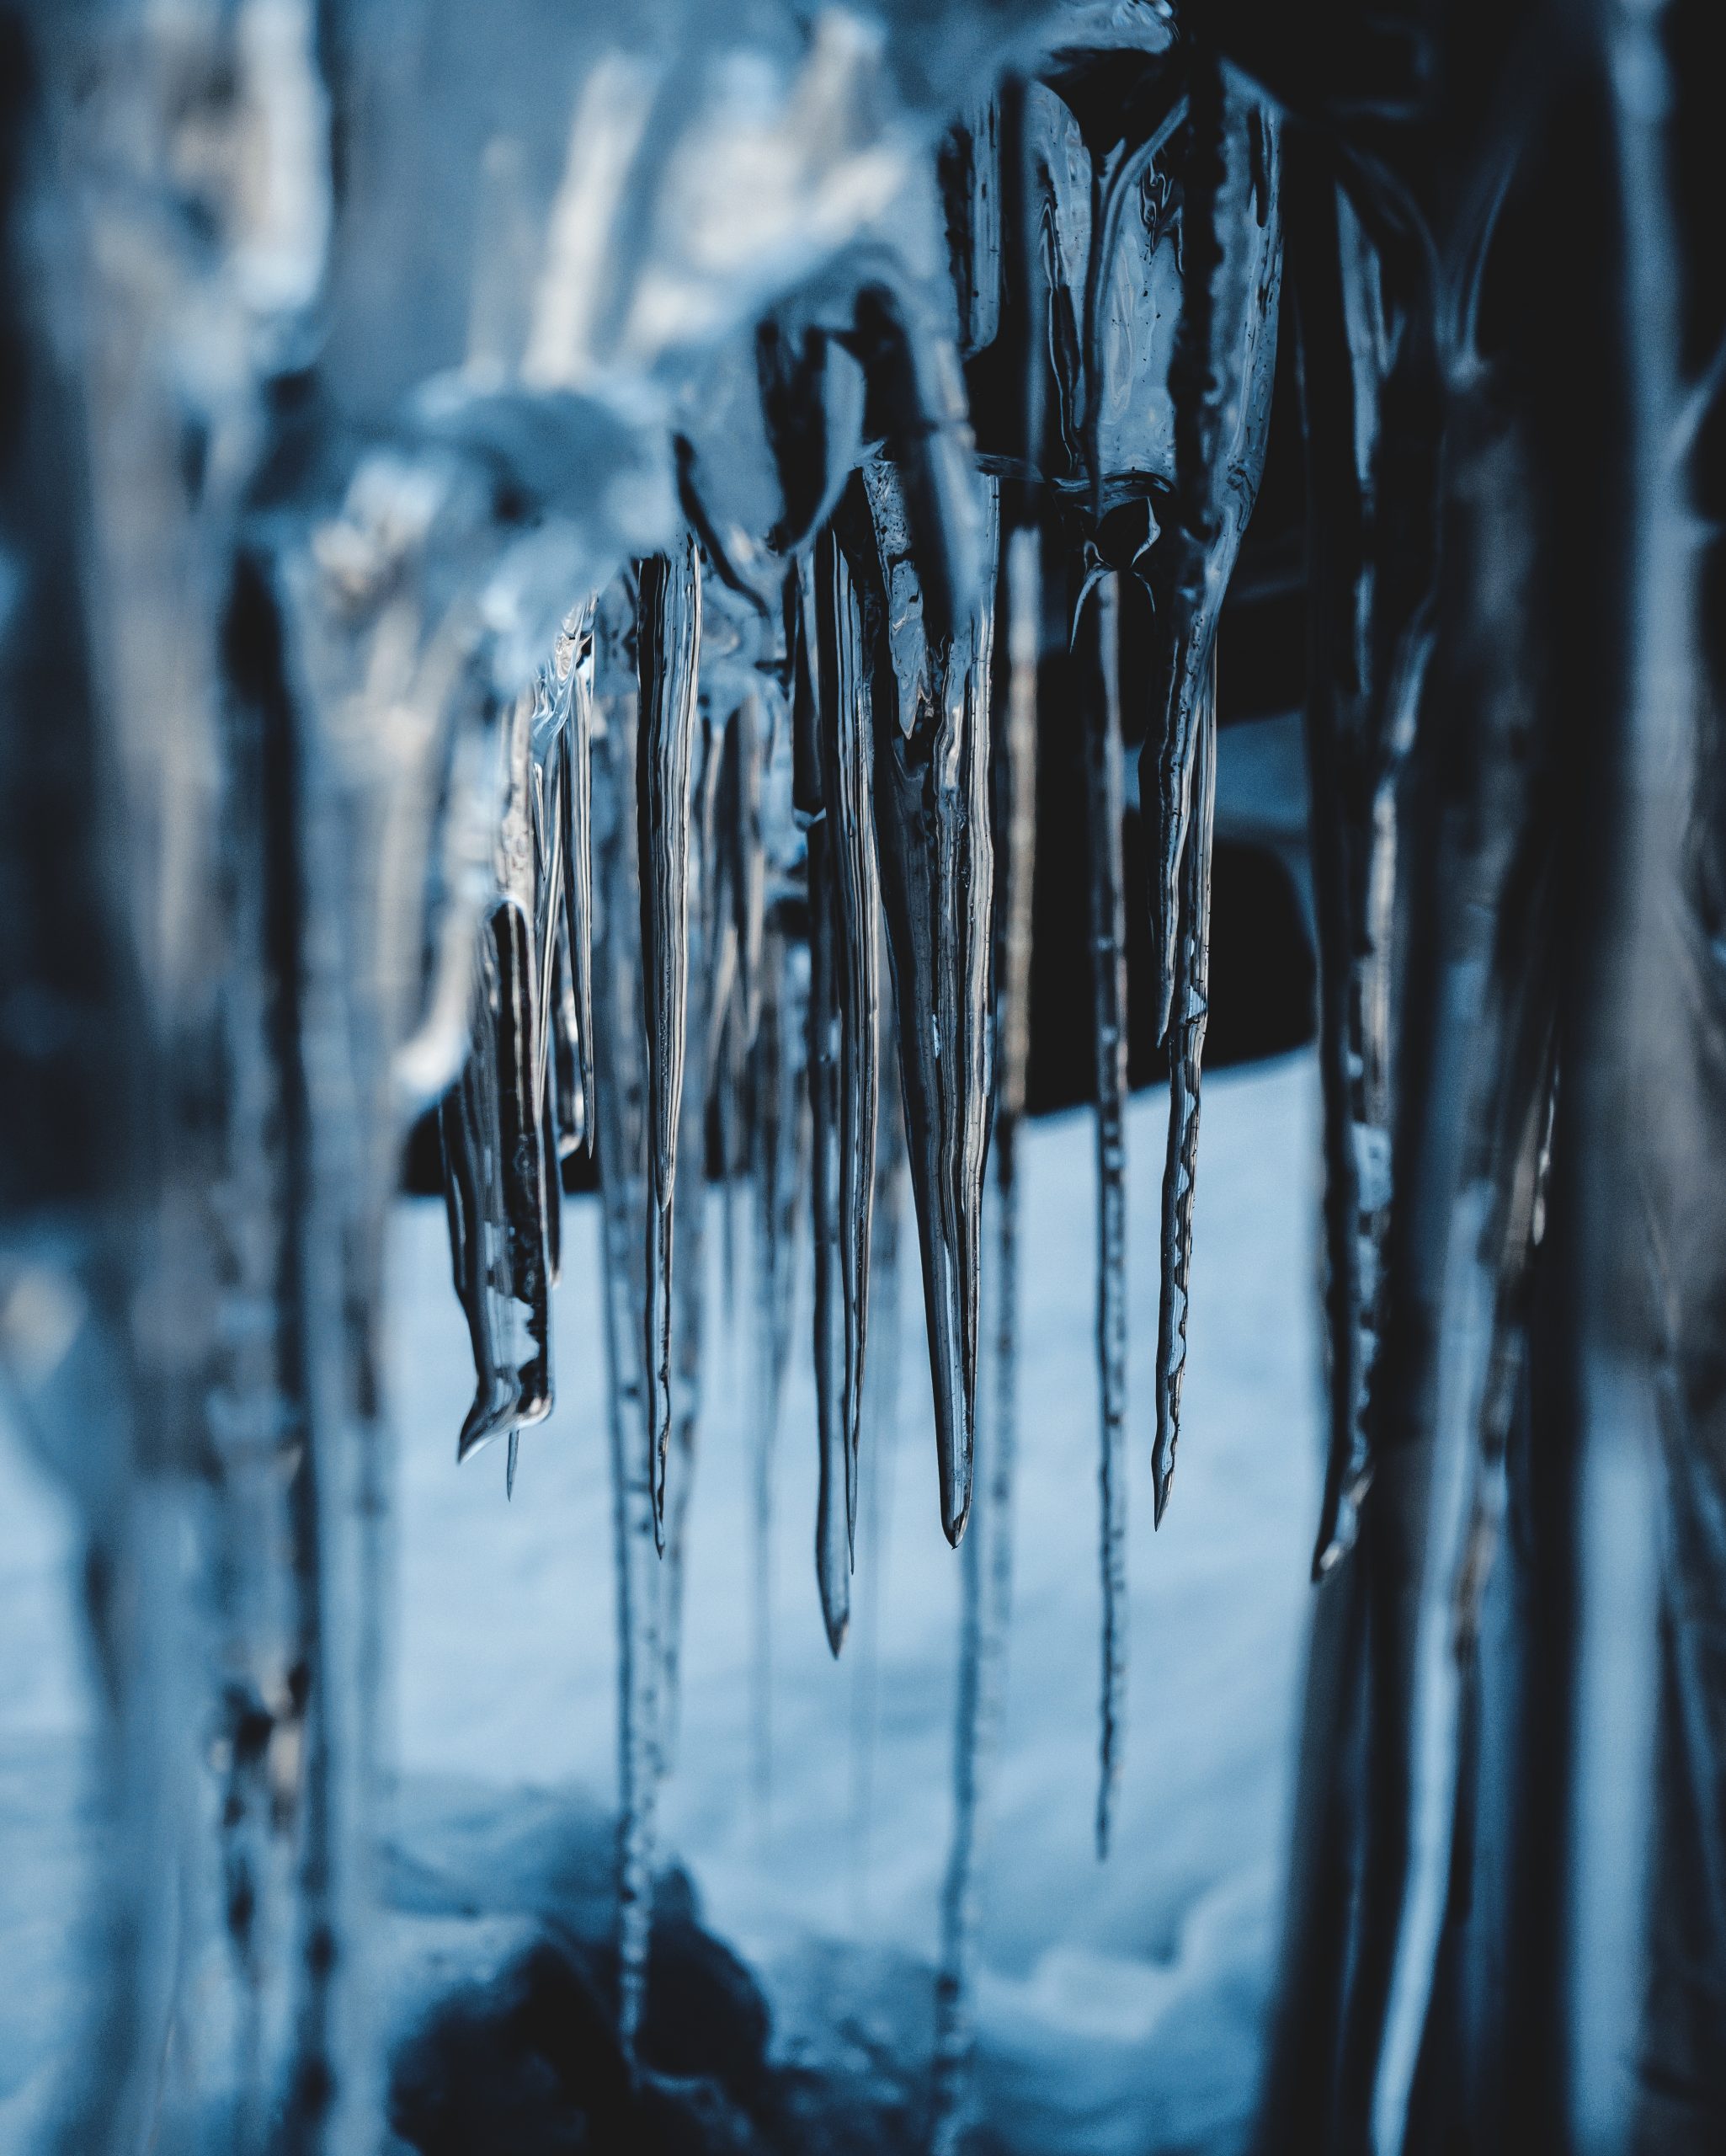 Icicle formation